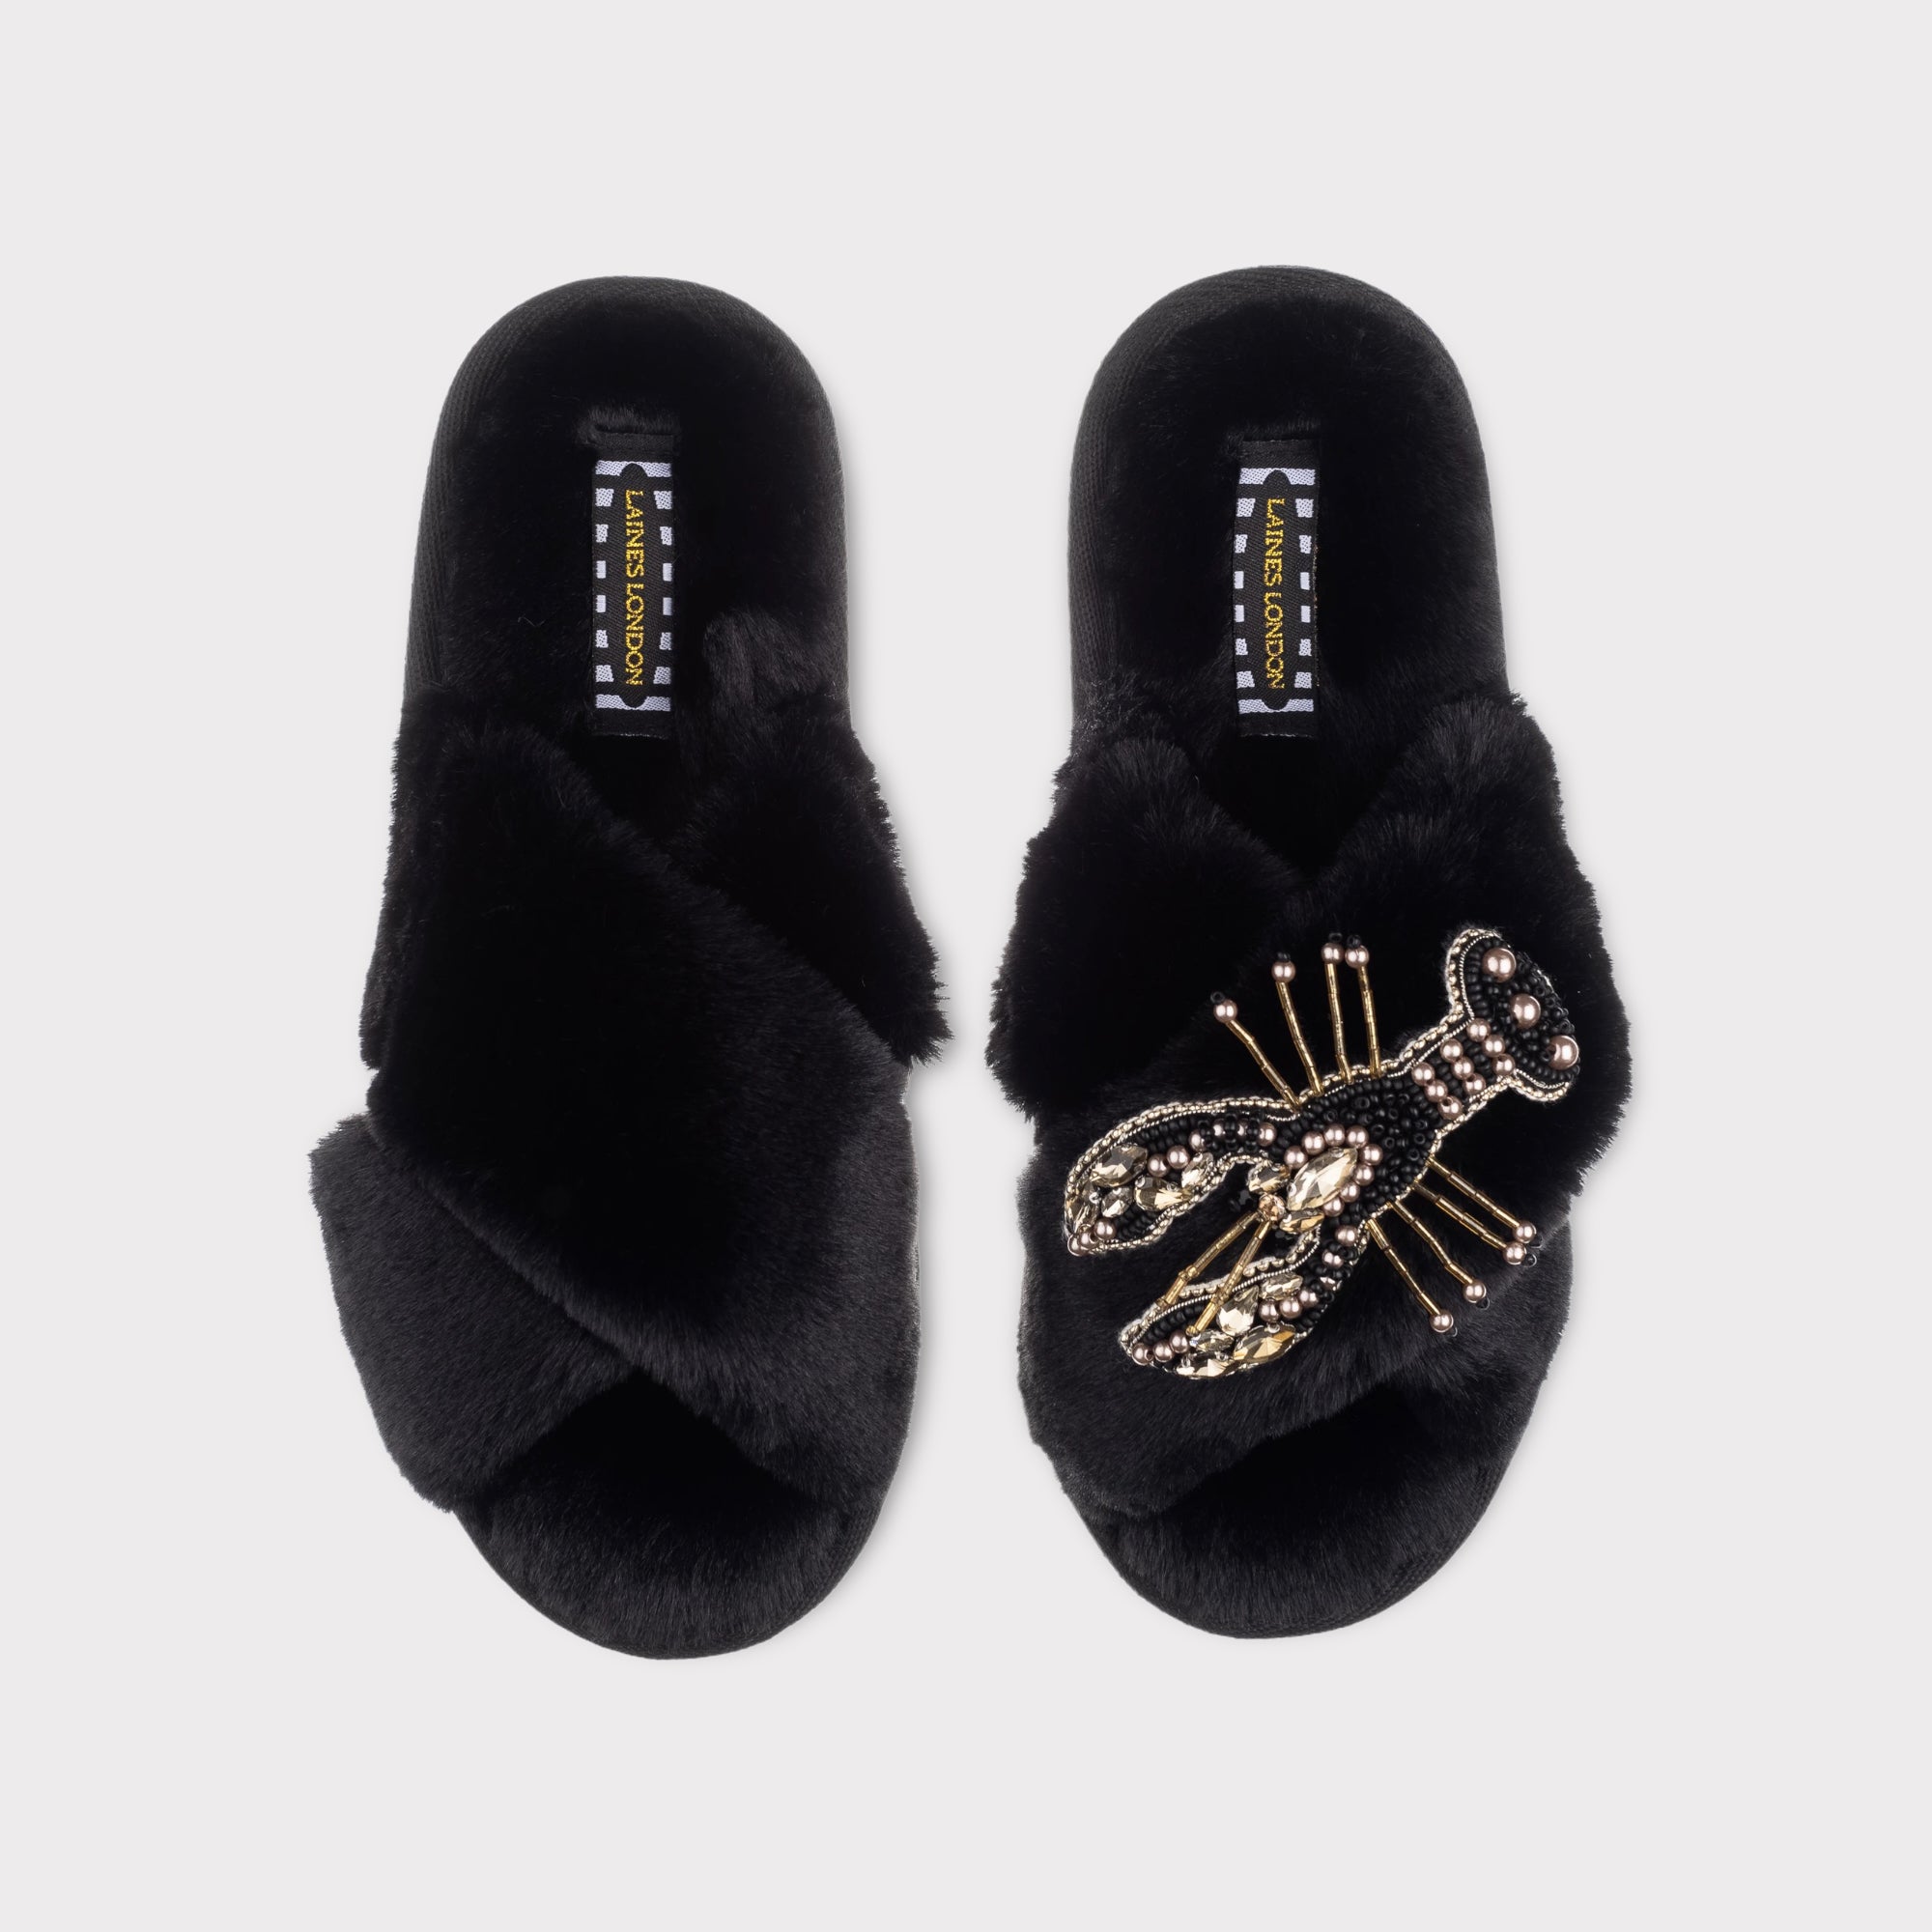 Laines London Classic Black Slippers with Artisan Black & Gold Lobster